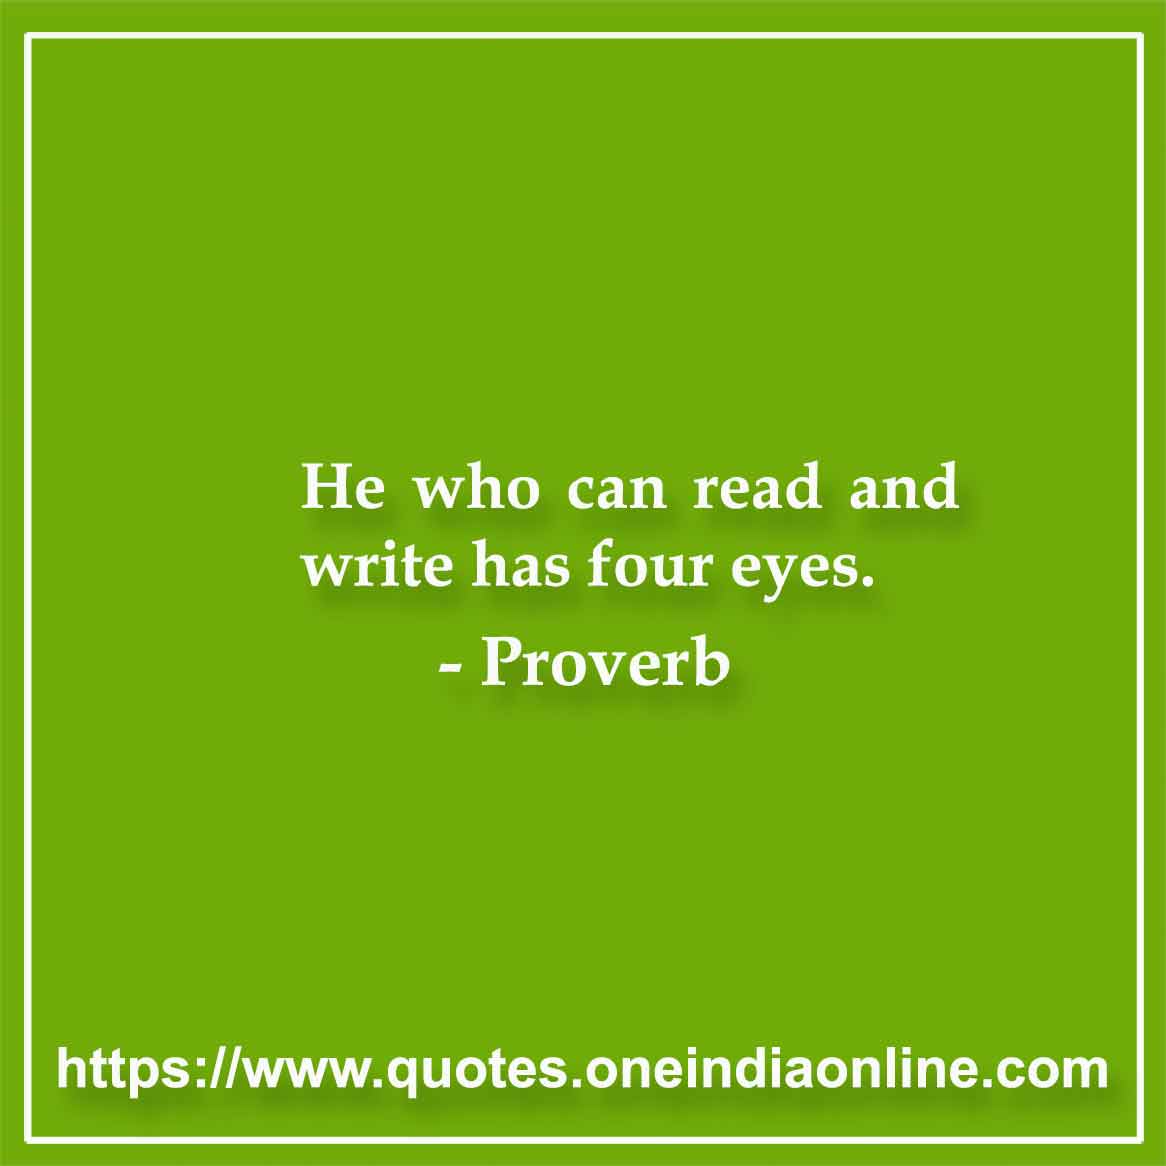 He who can read and write has four eyes.

Albanian